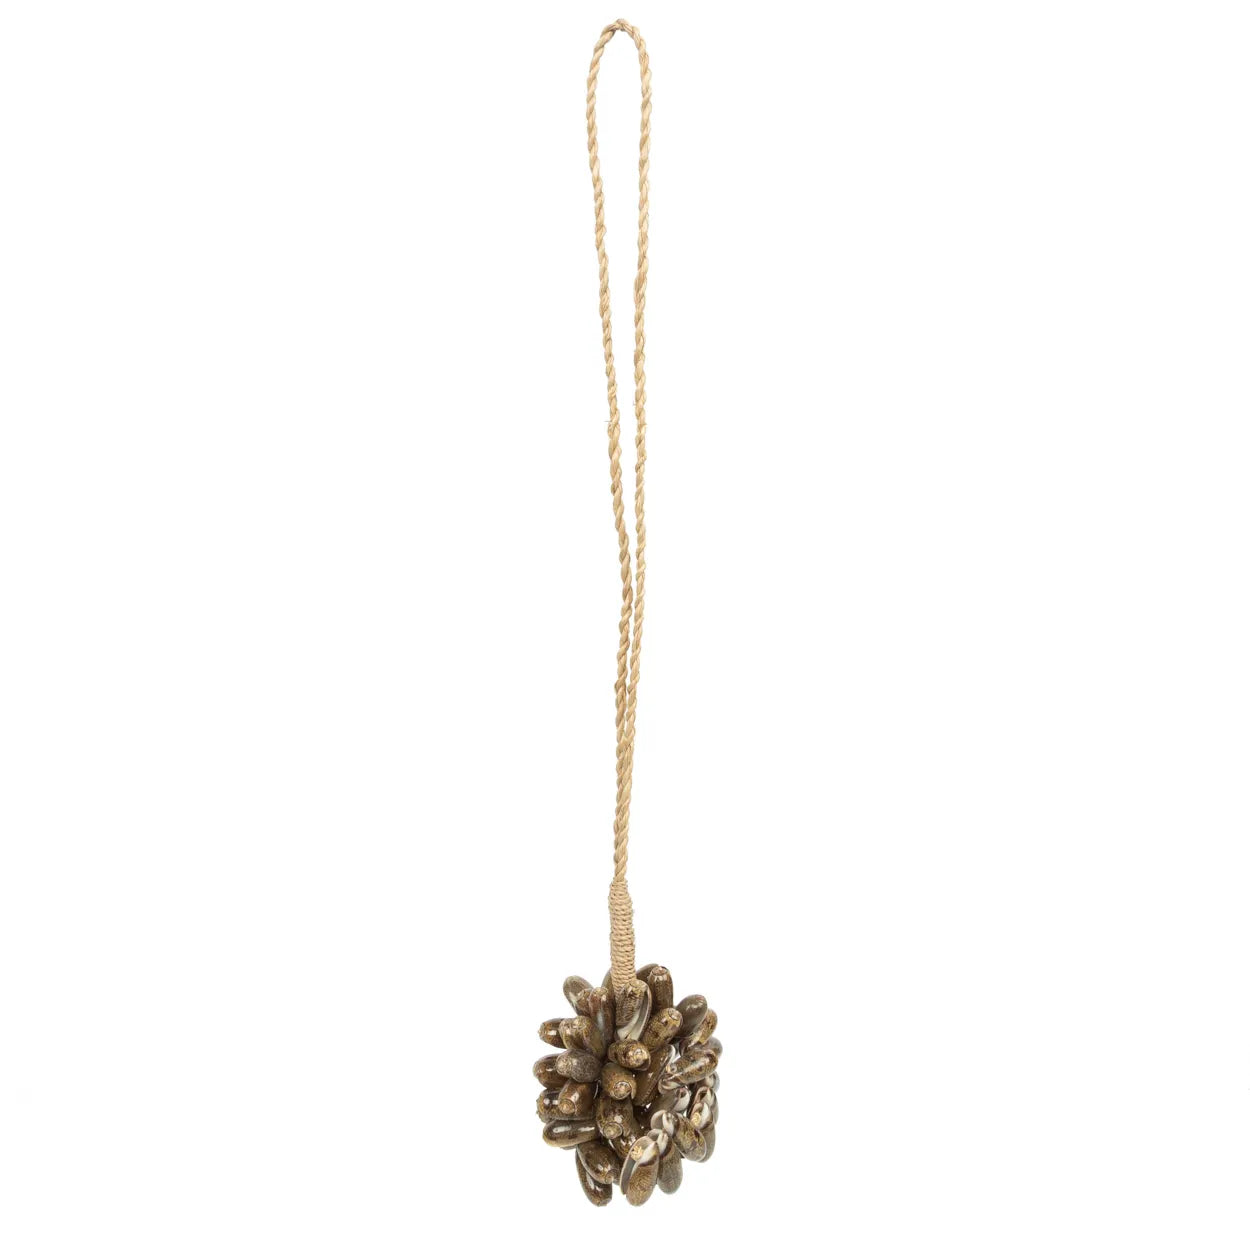 Calpe Shell Charm - Balinese Crafted Tassel